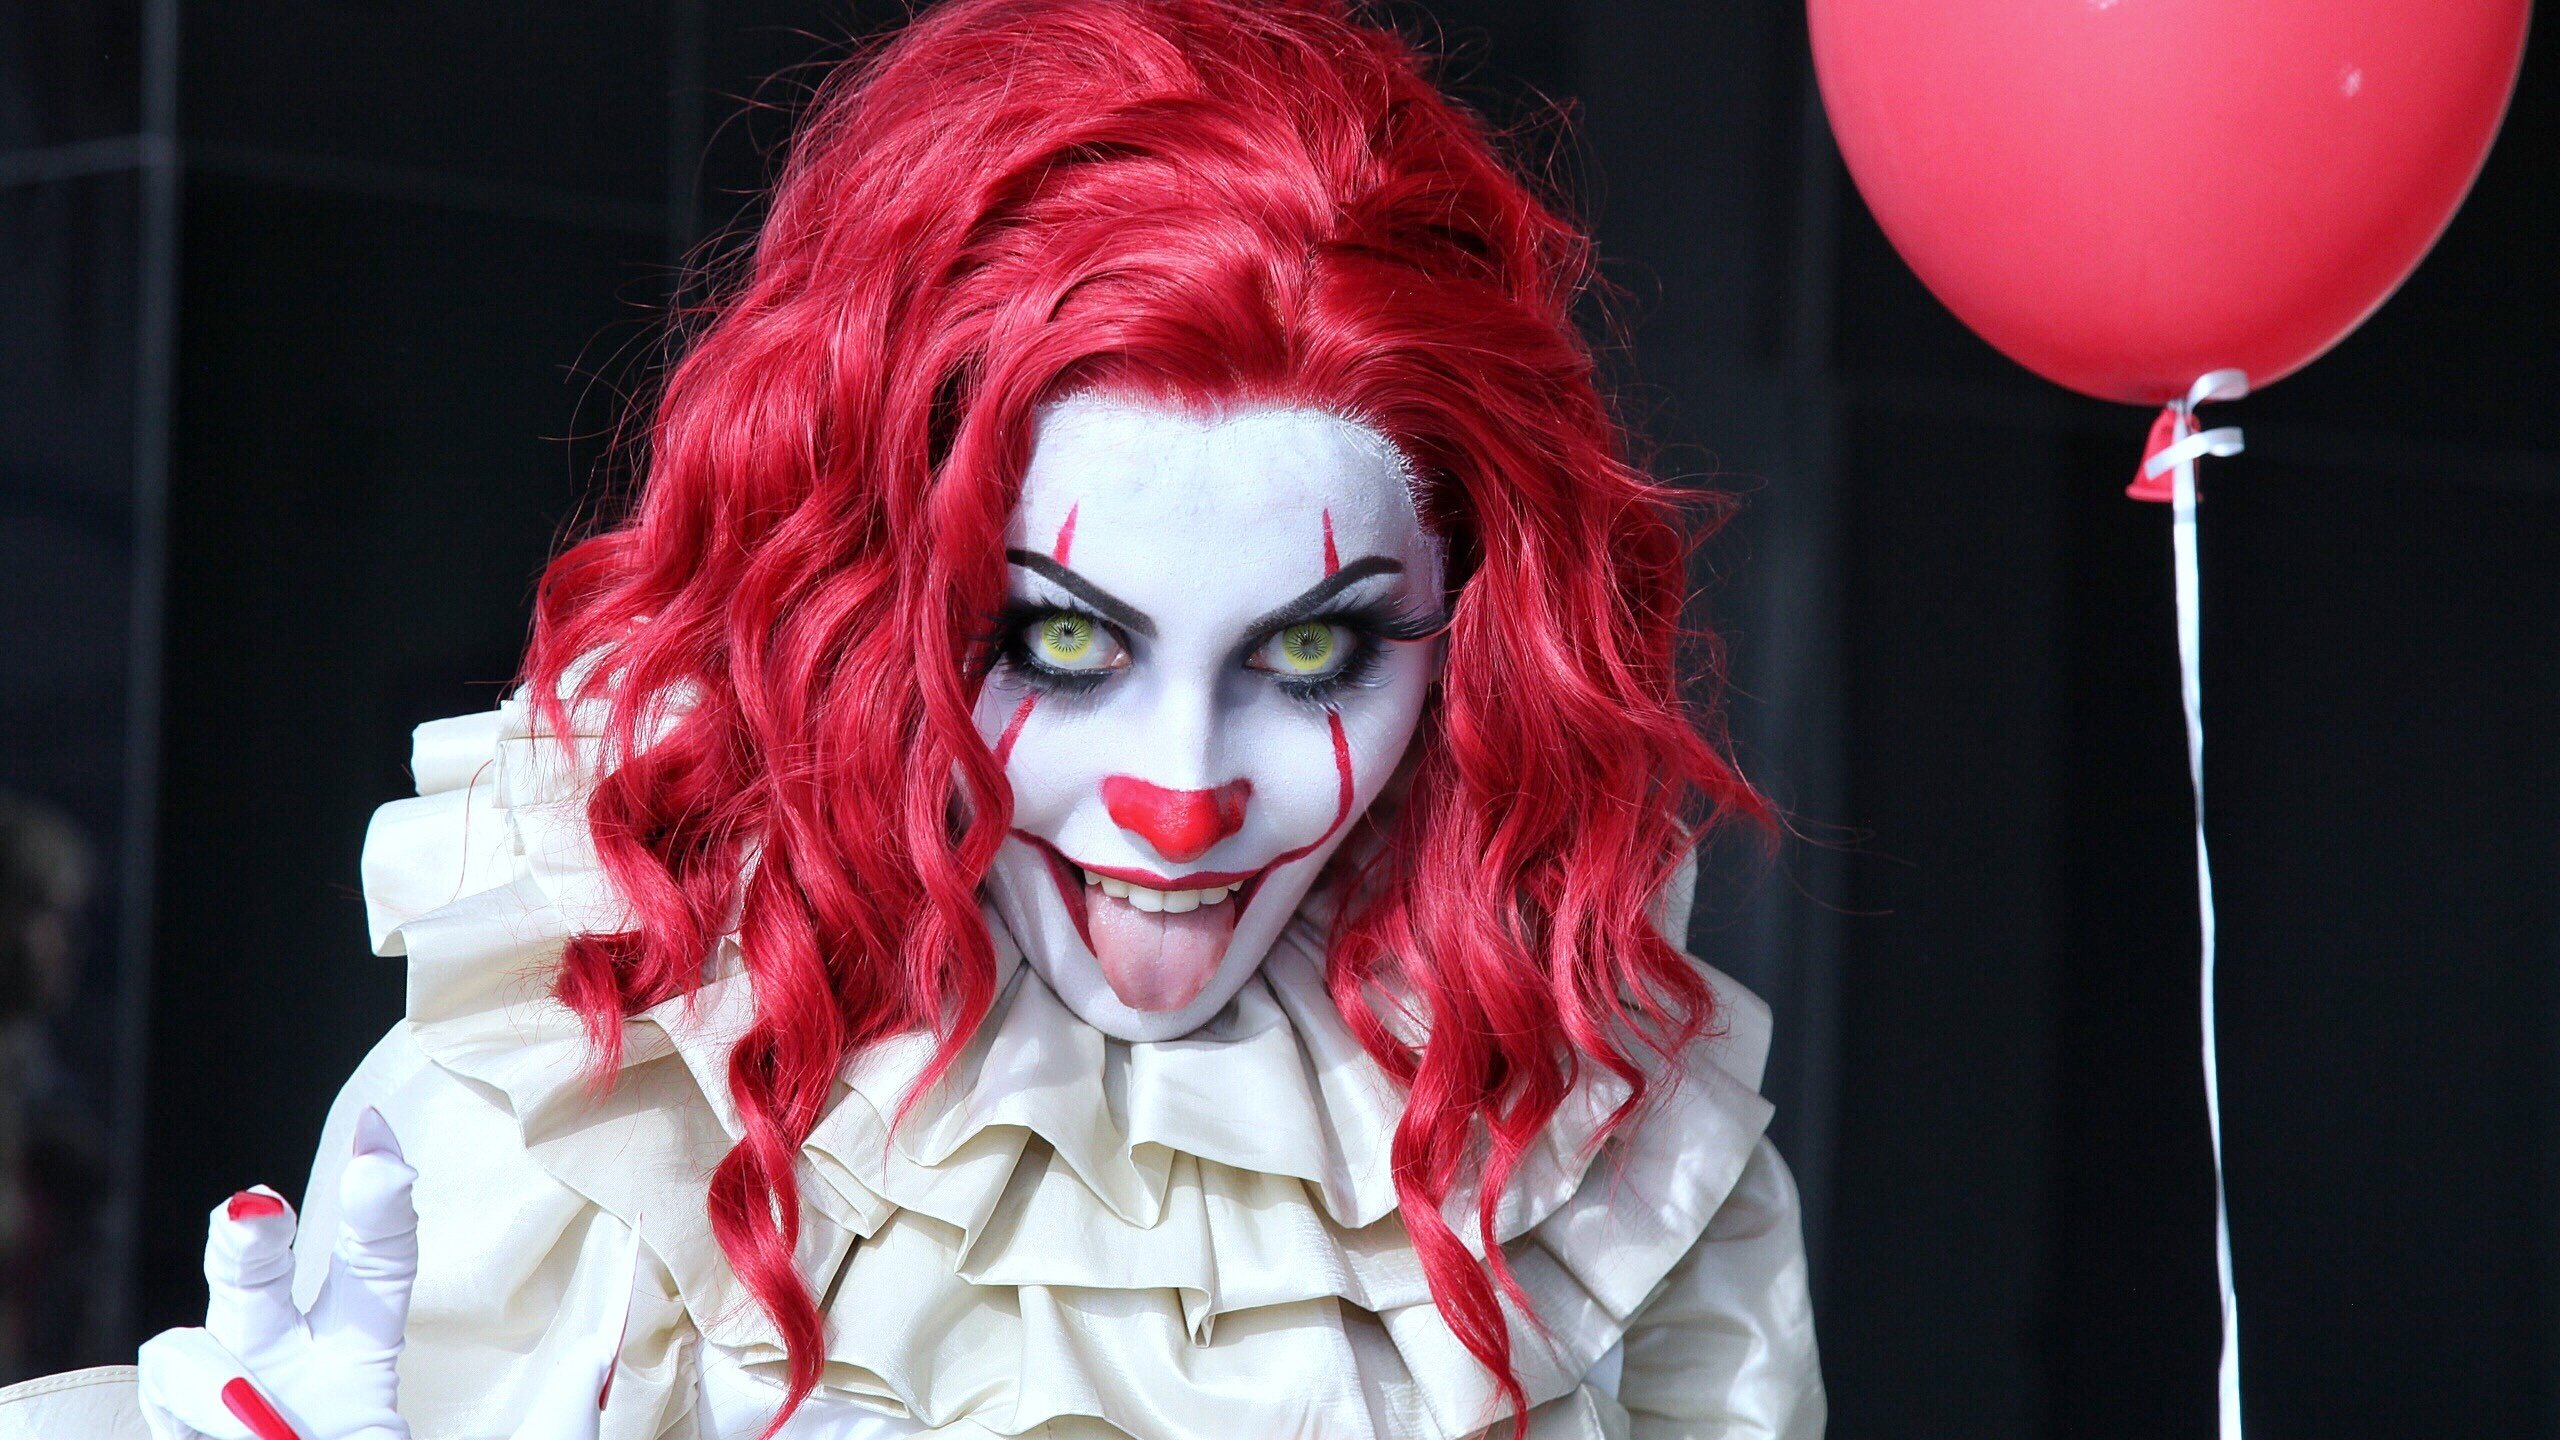 Image Horrible Redhead girl cosplayers clowns Pennywise